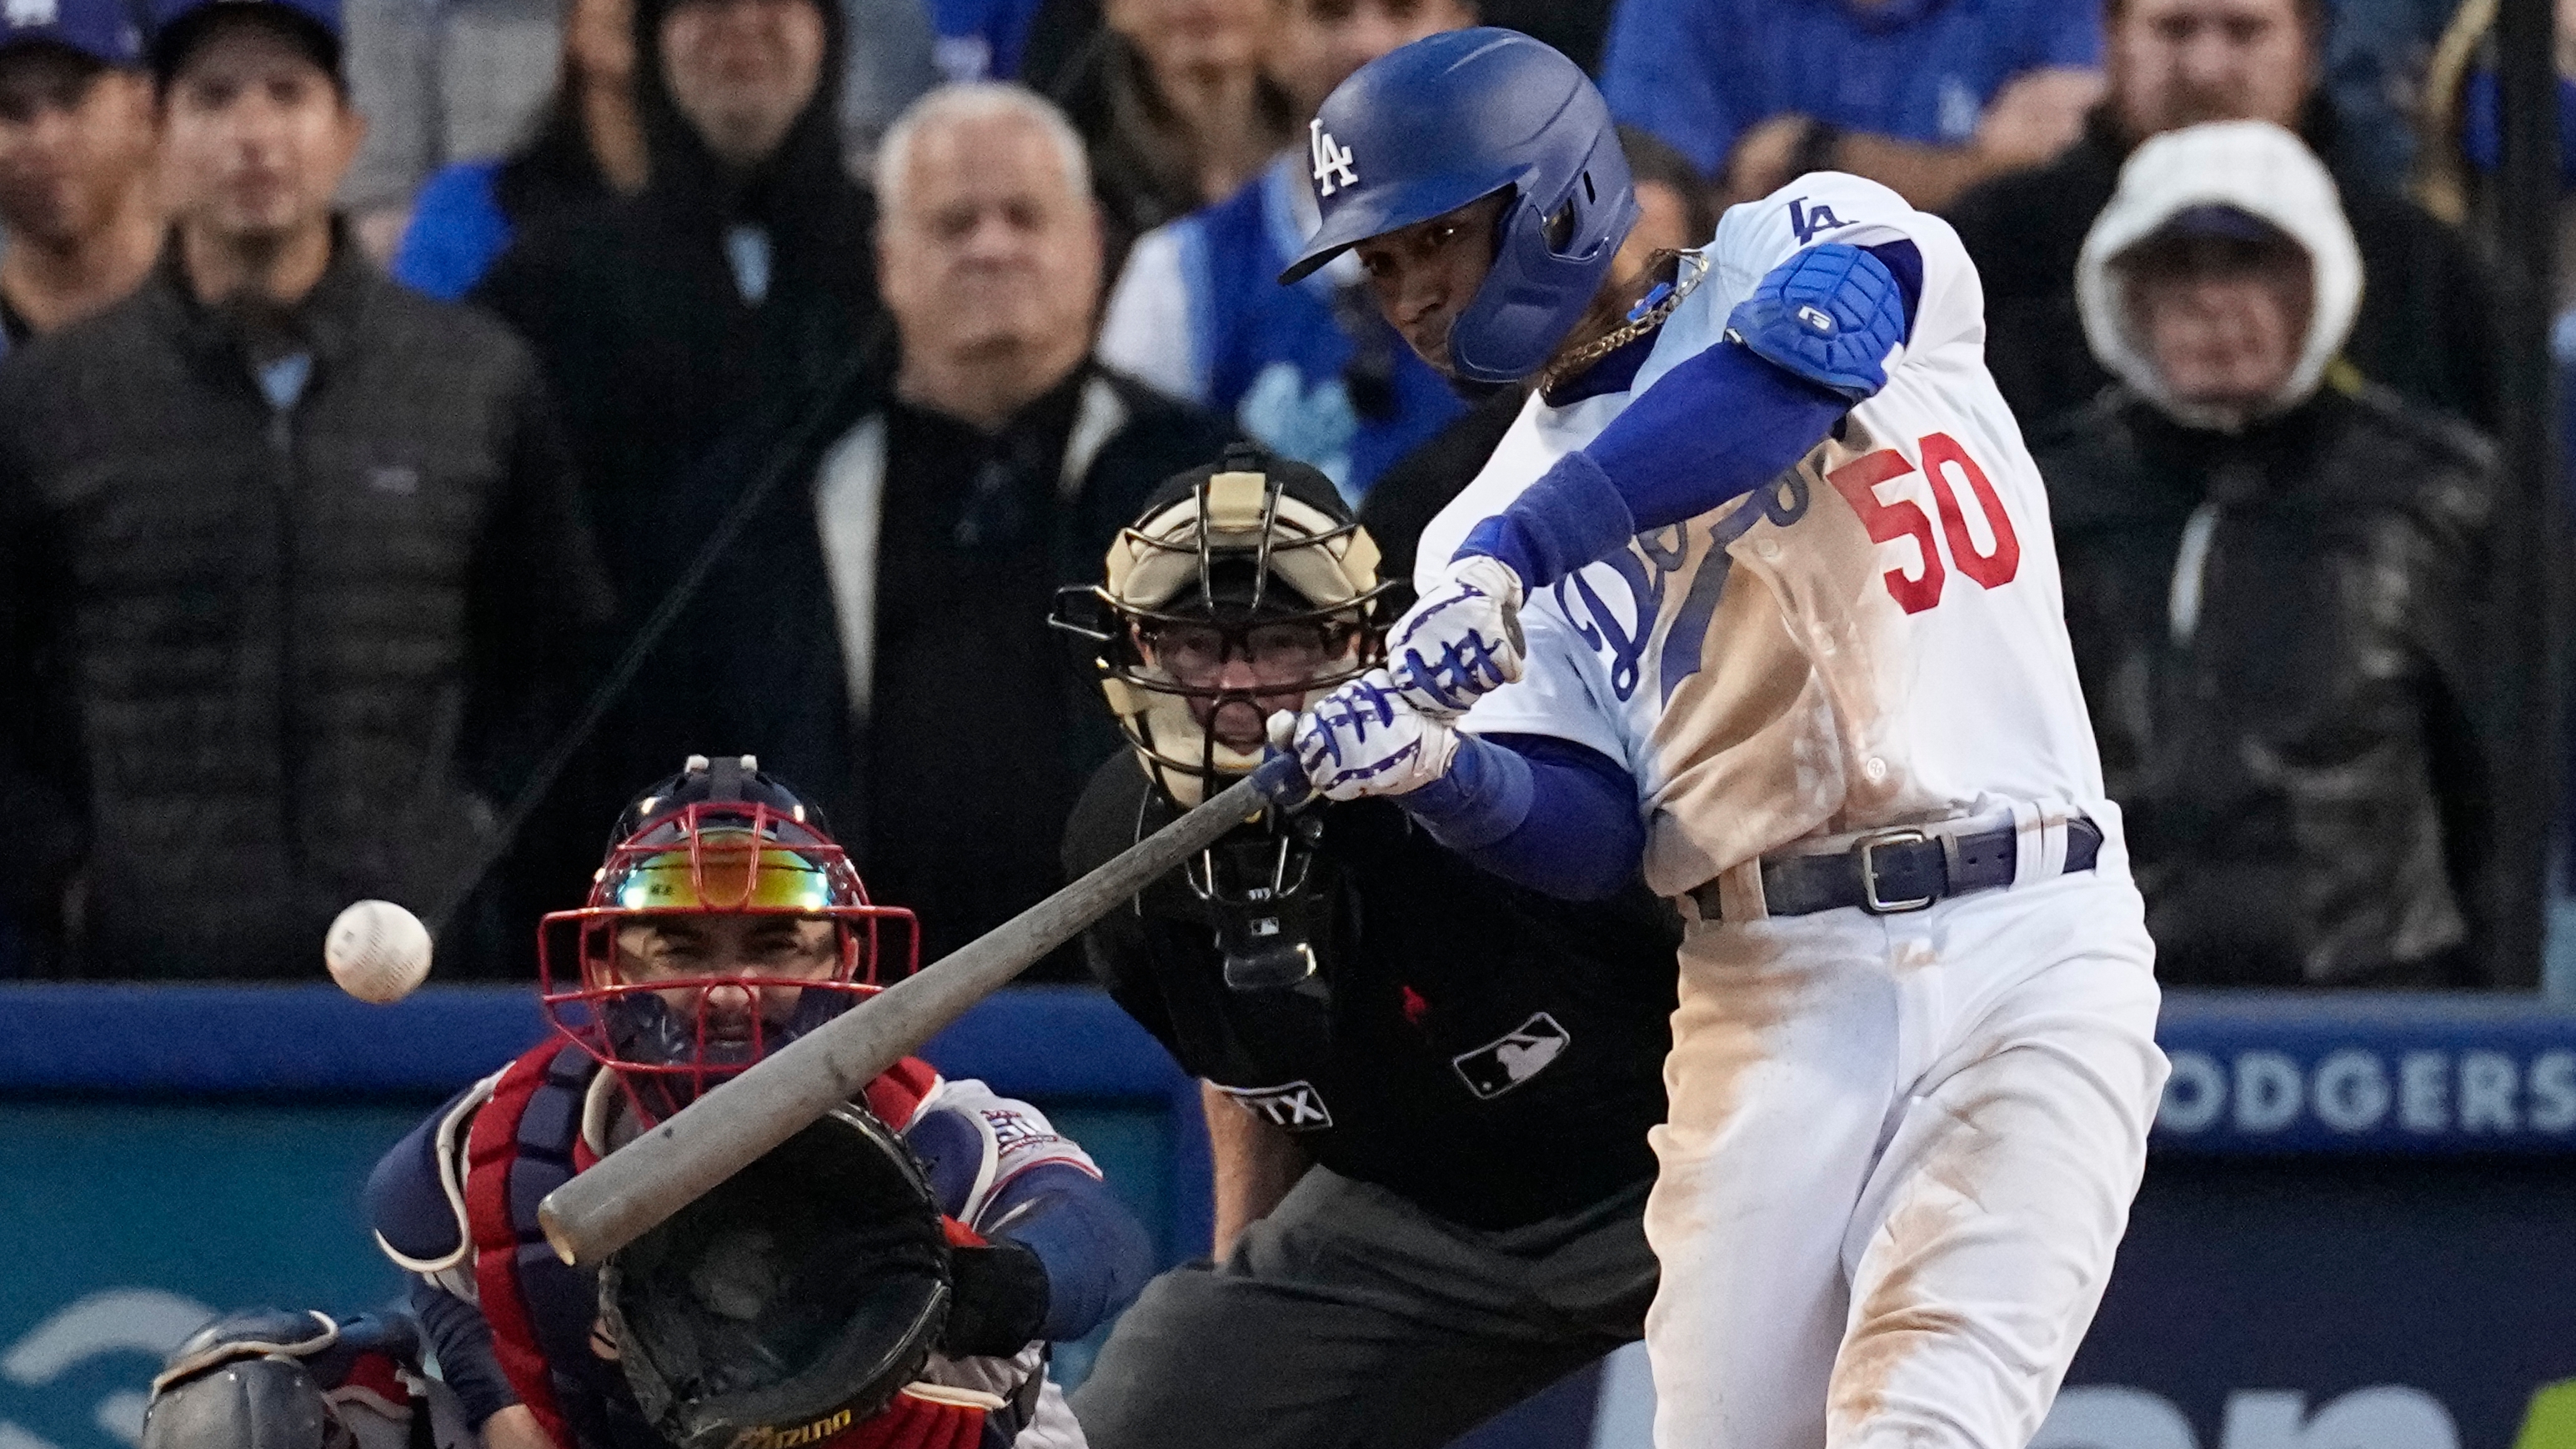 Mookie Betts could never suit up for the Dodgers under MLB's new